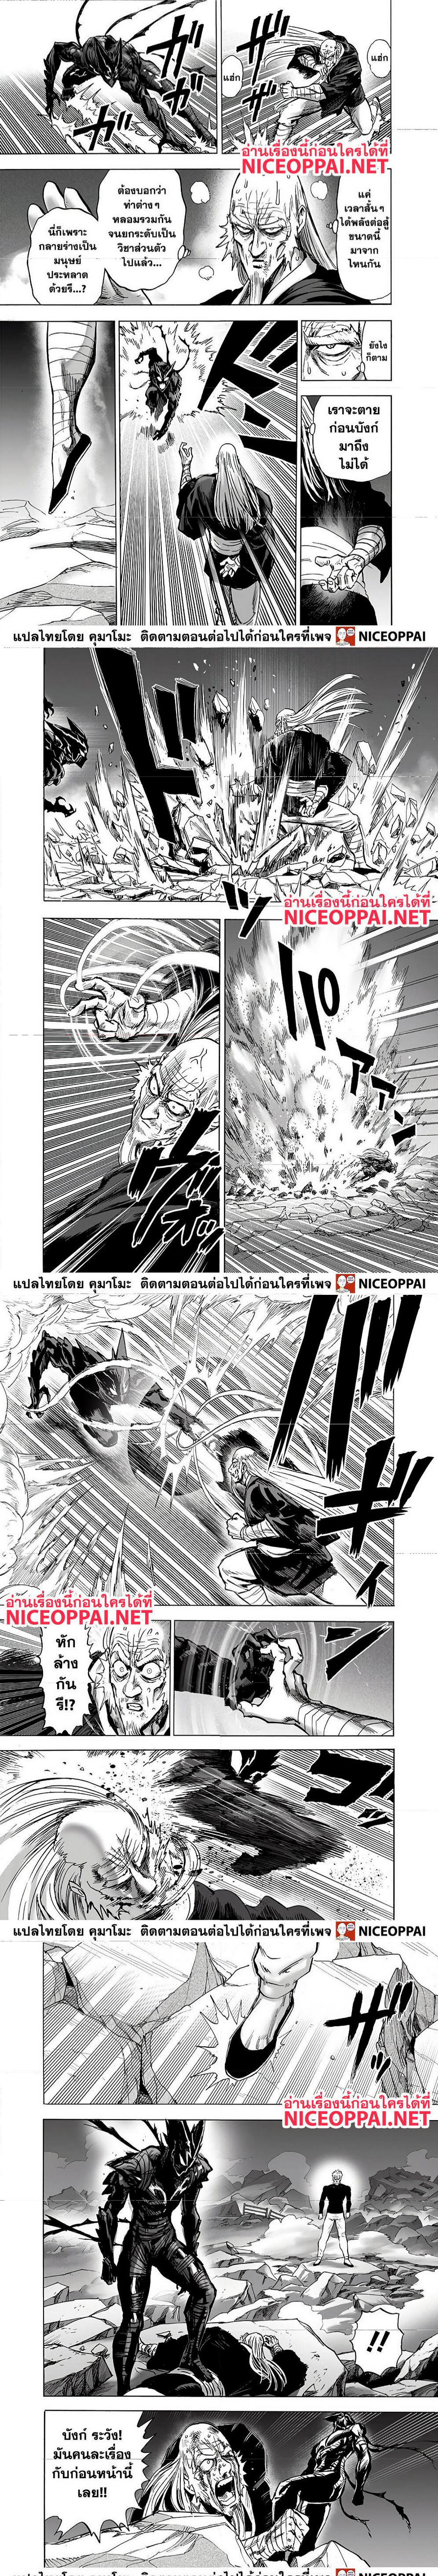 One Punch Man147 (8)